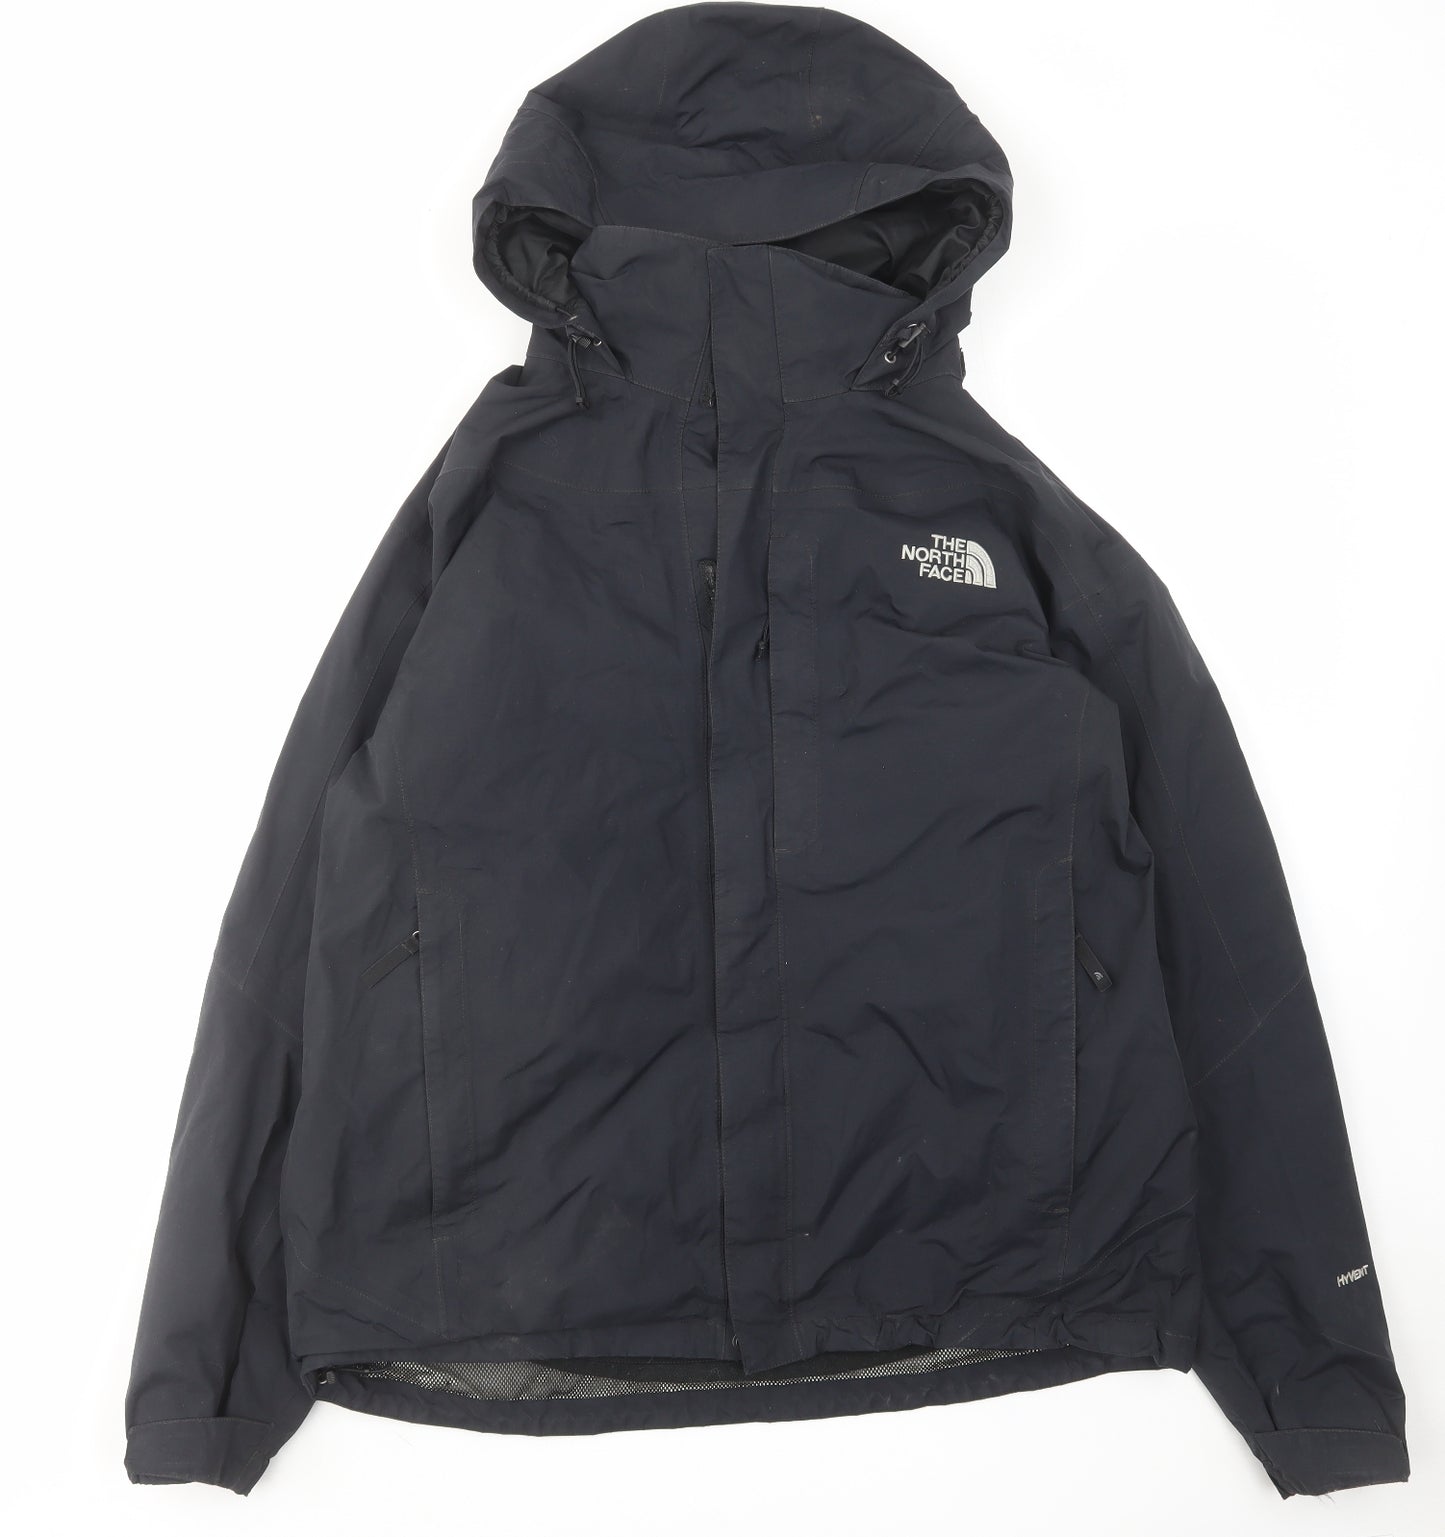 The North Face Mens Black Jacket Size XL Zip